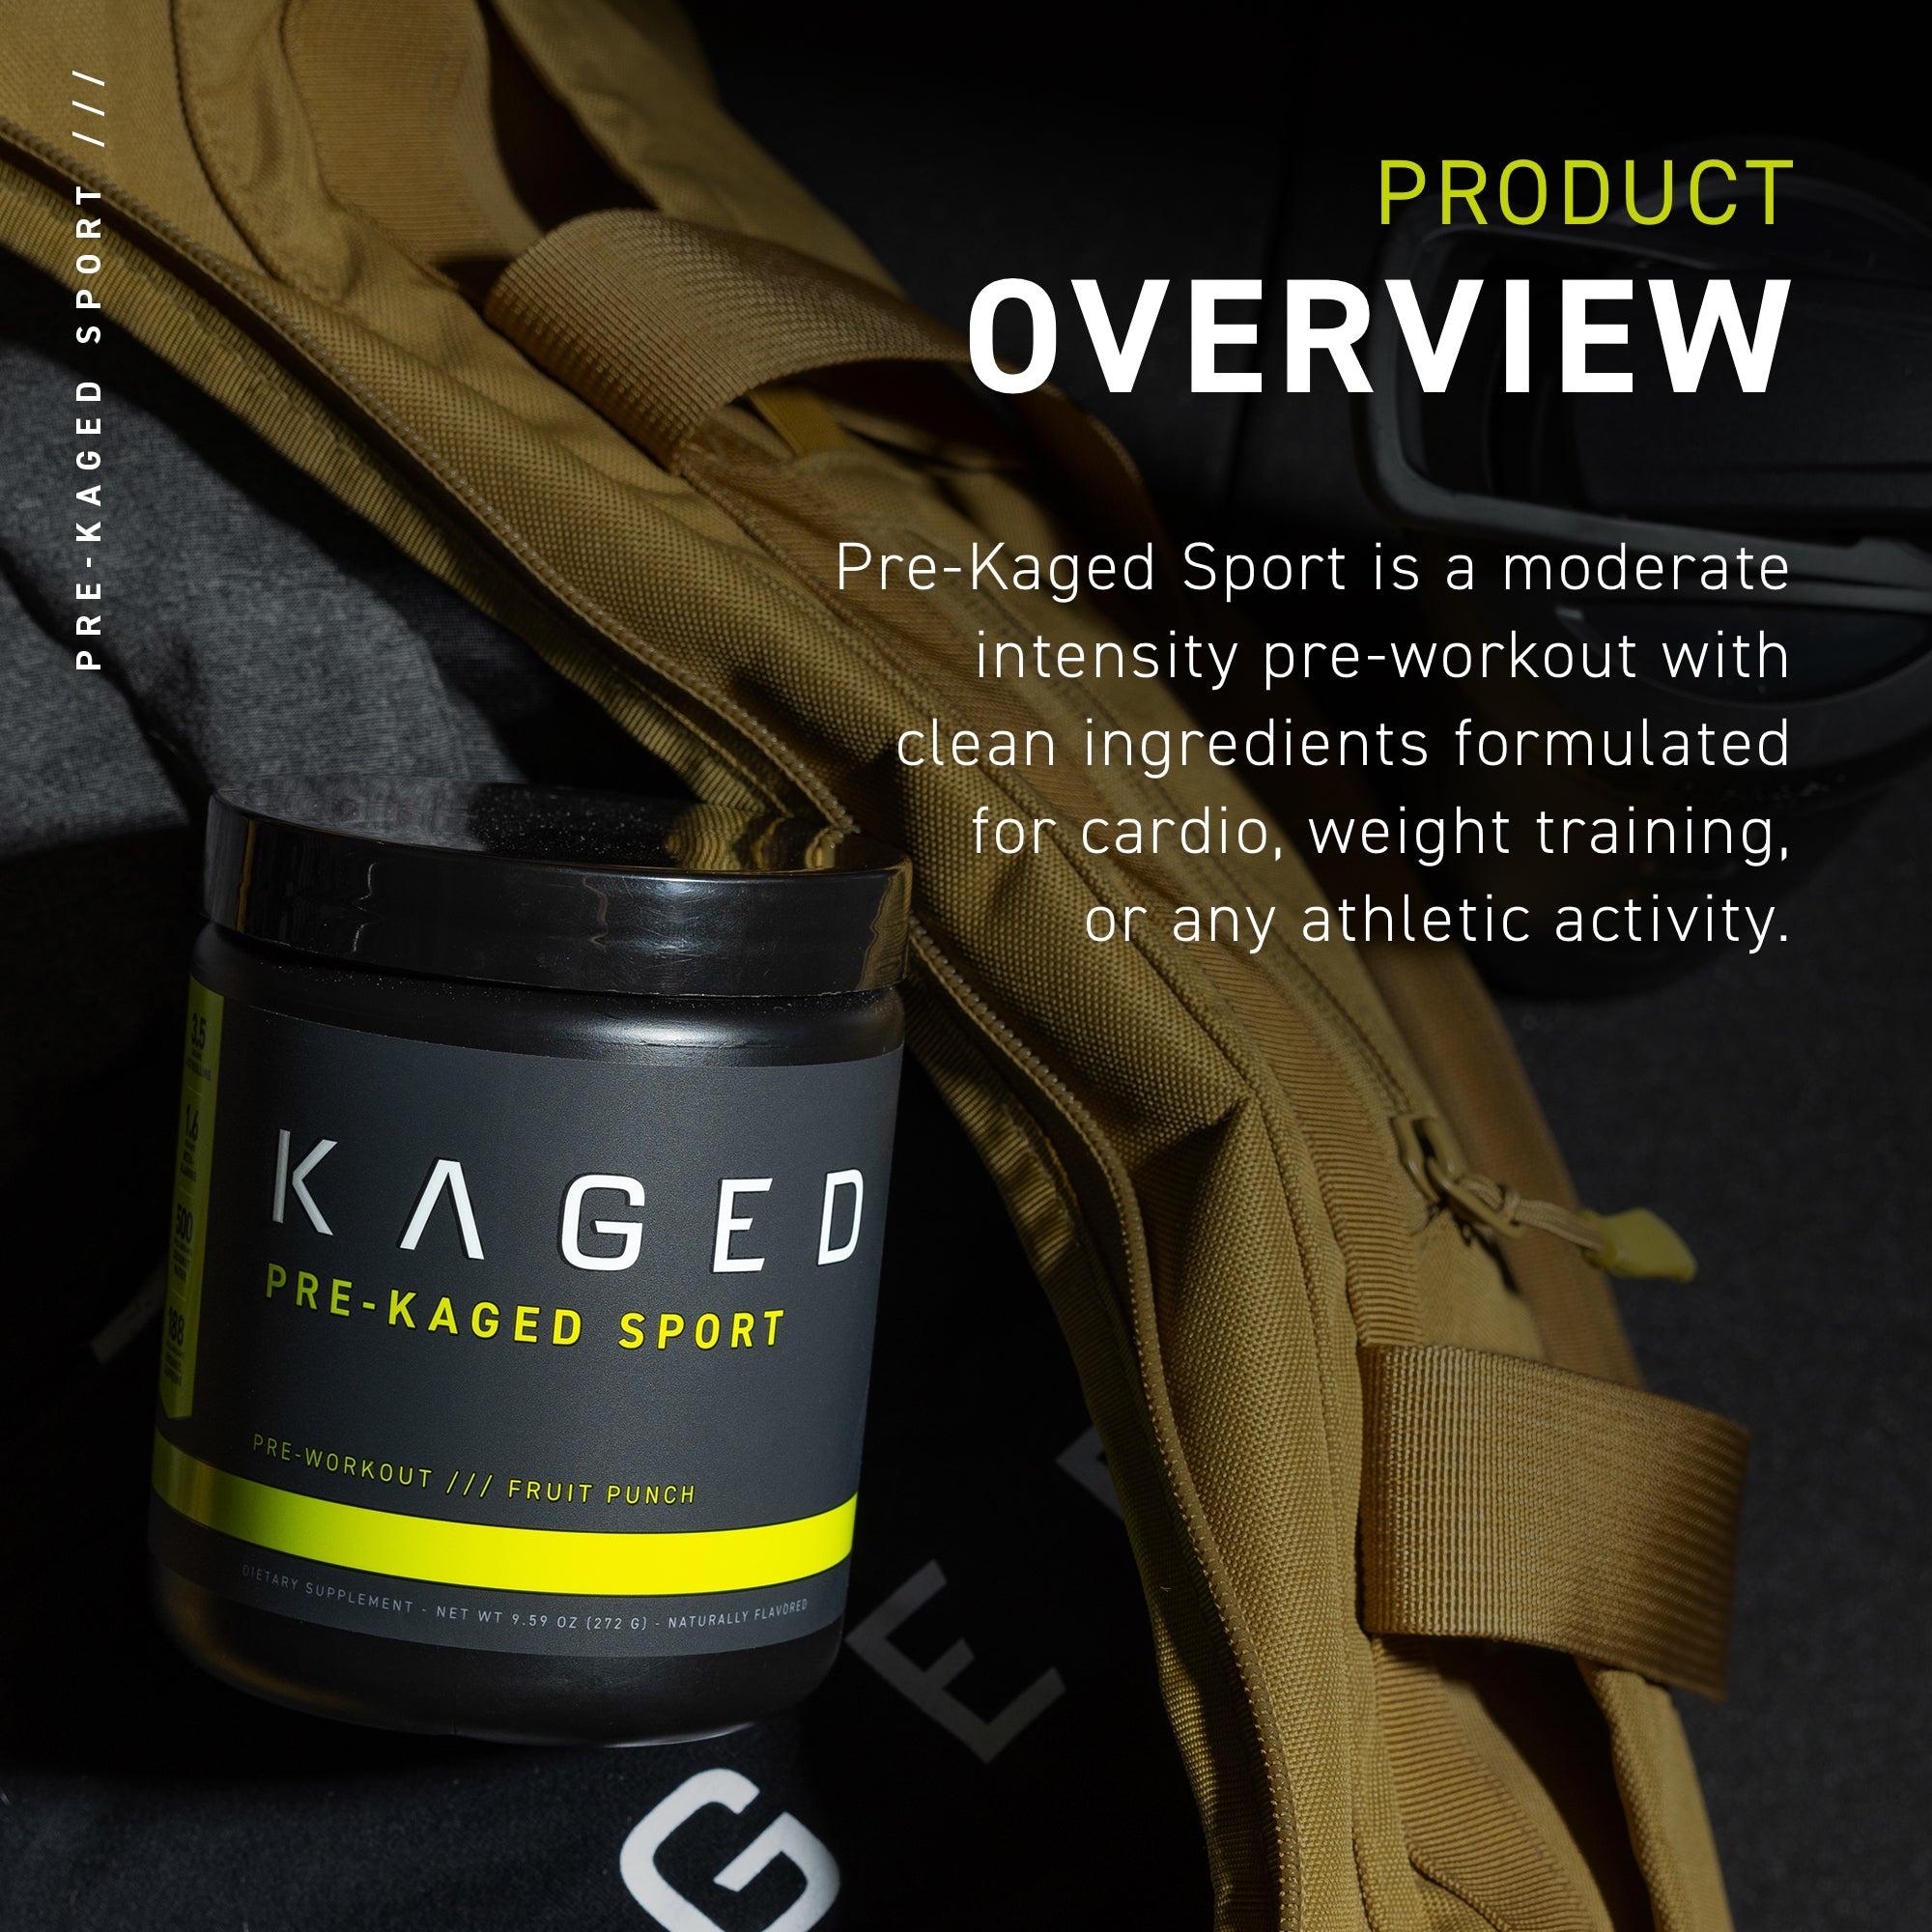 Kaged Pre-Kaged Sport Overview